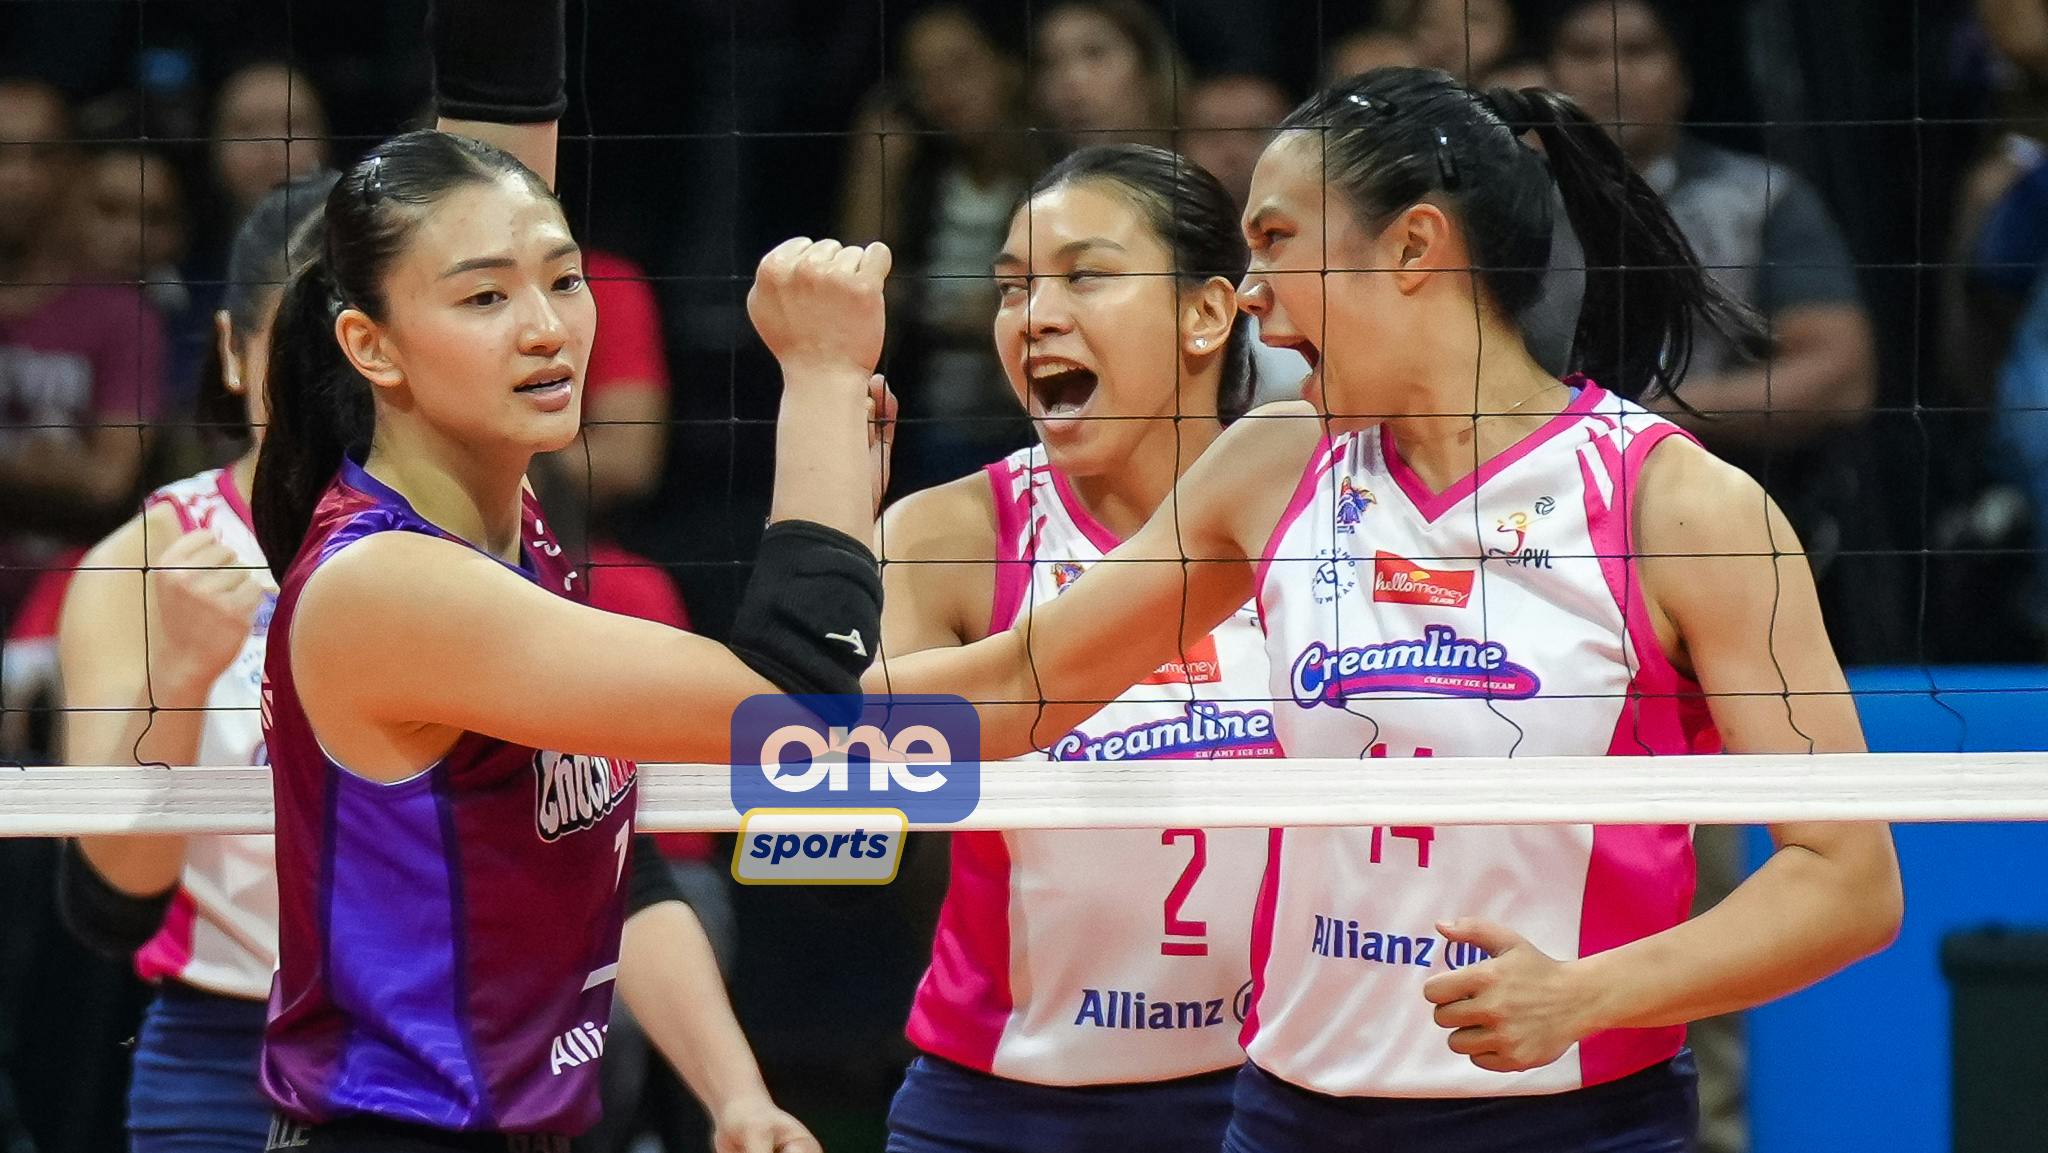 PVL: Bea de Leon says she drew strength in Creamline’s trust during first encounter with former team Choco Mucho